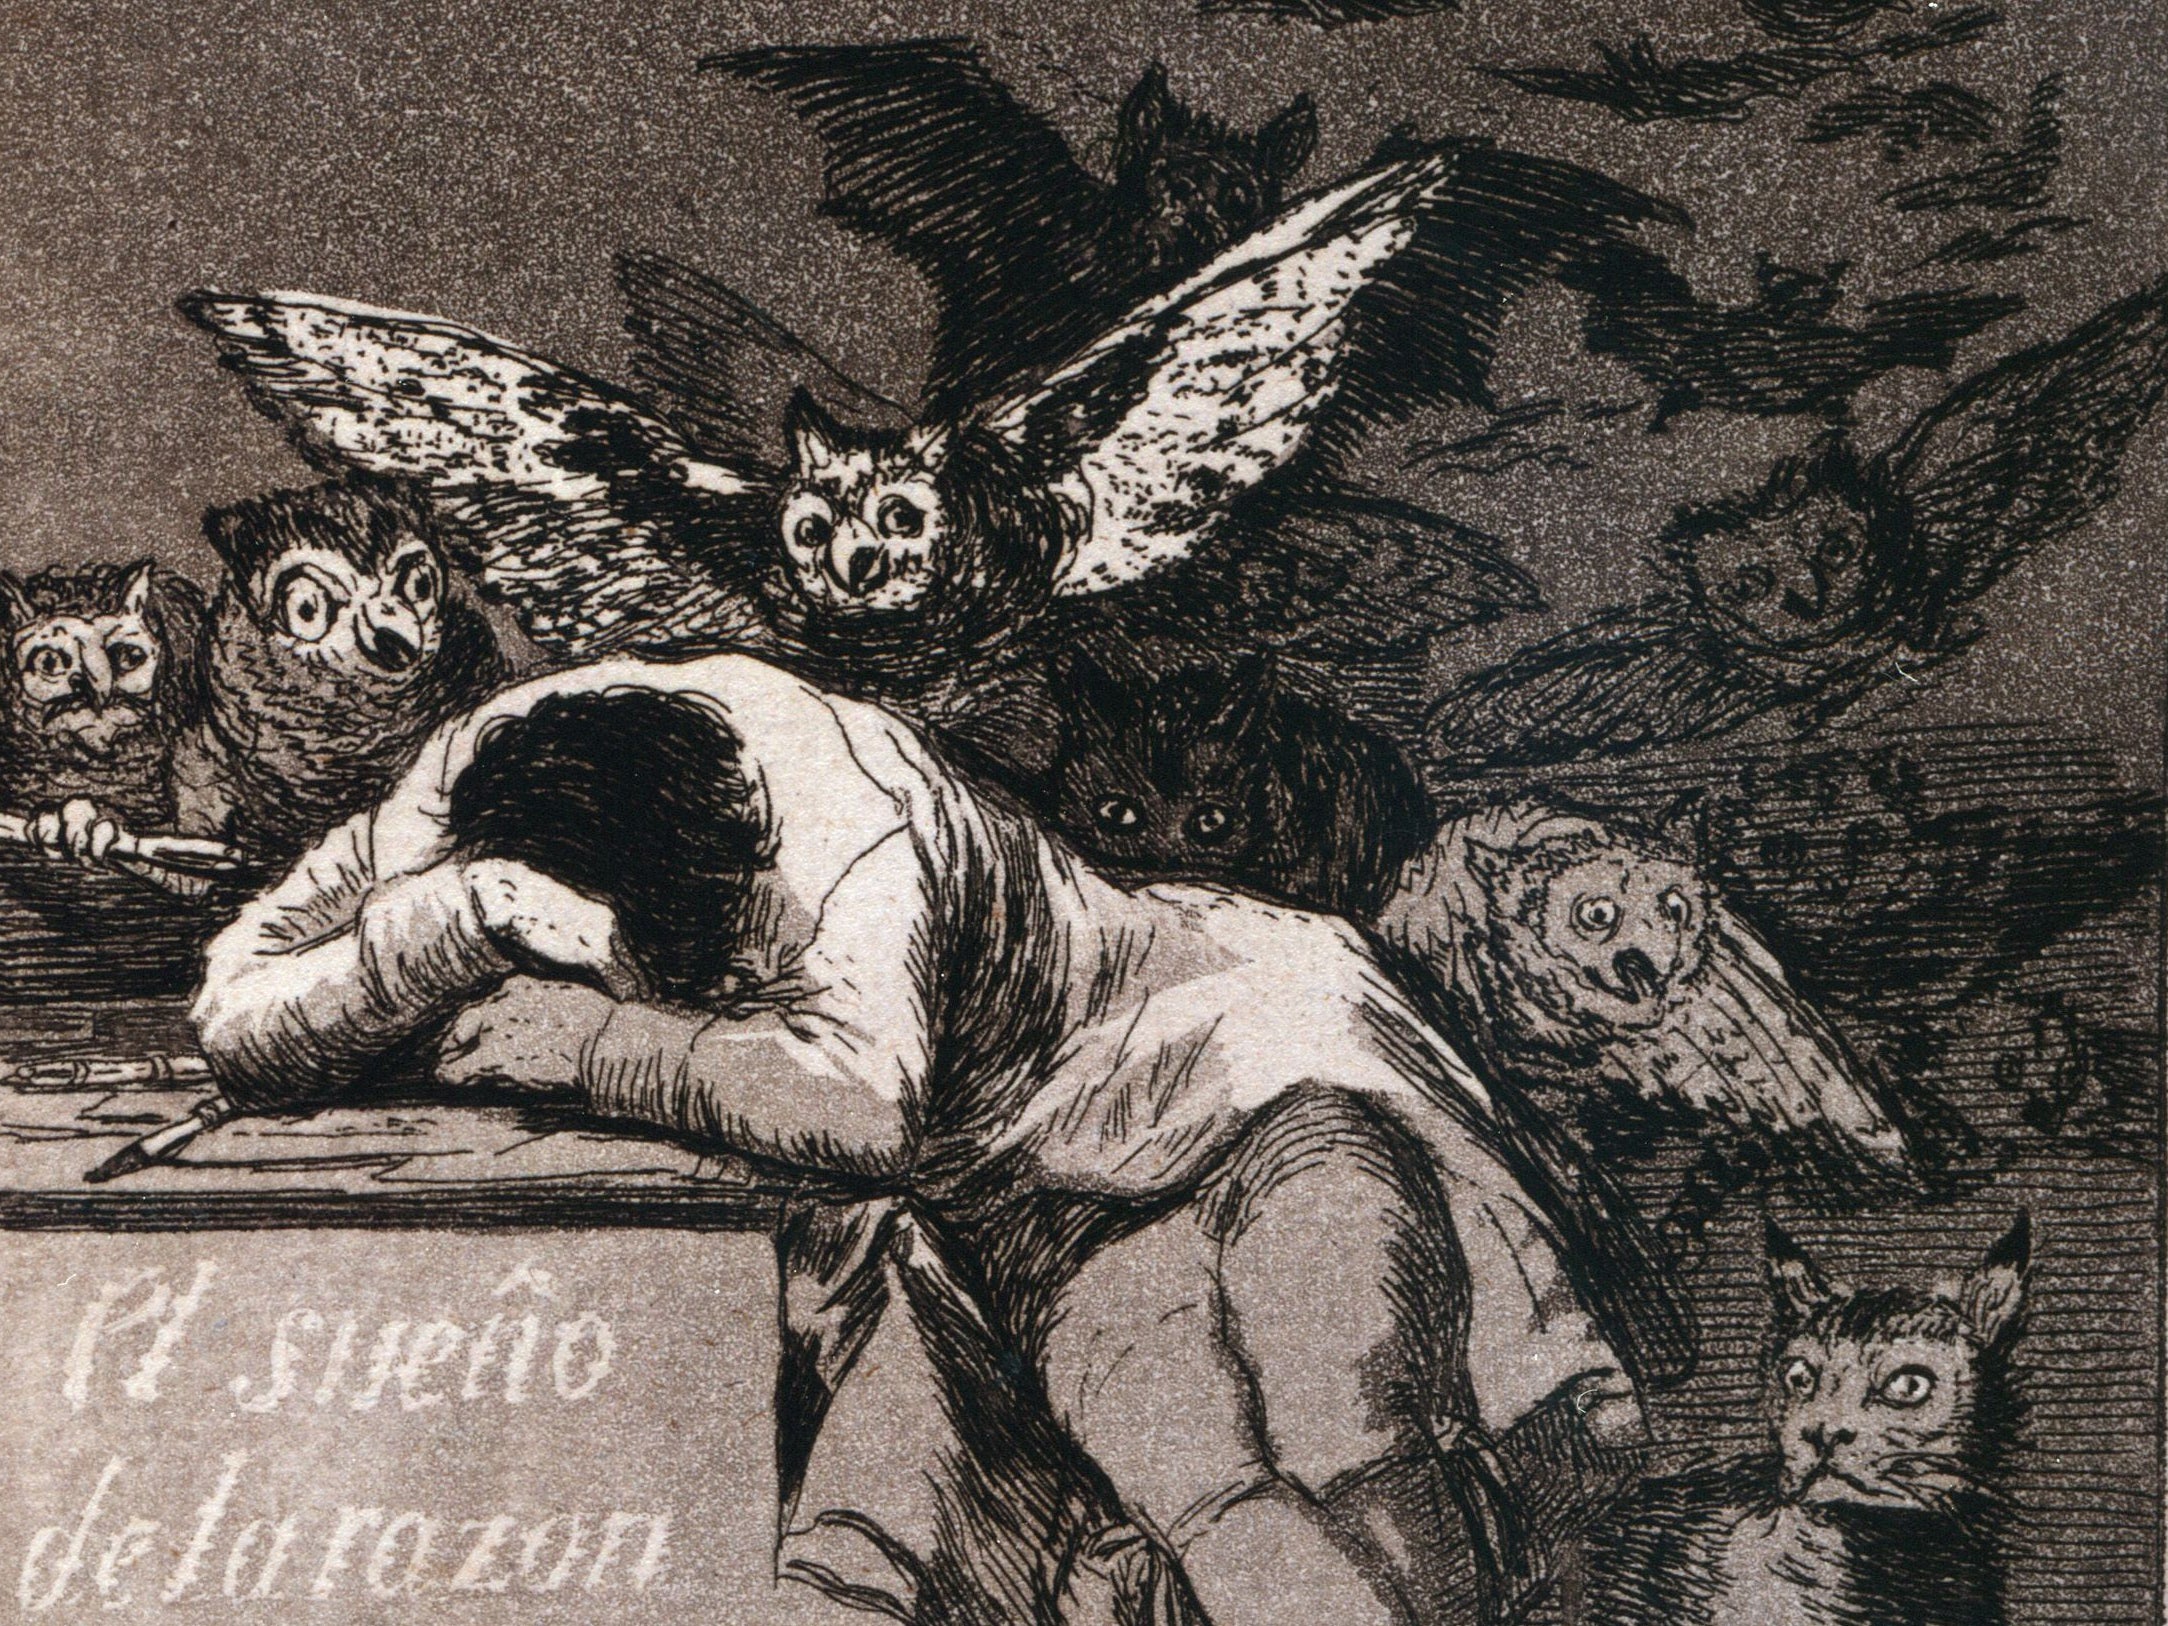 ‘The Sleep of Reason Produces Monsters’ by Francisco Goya